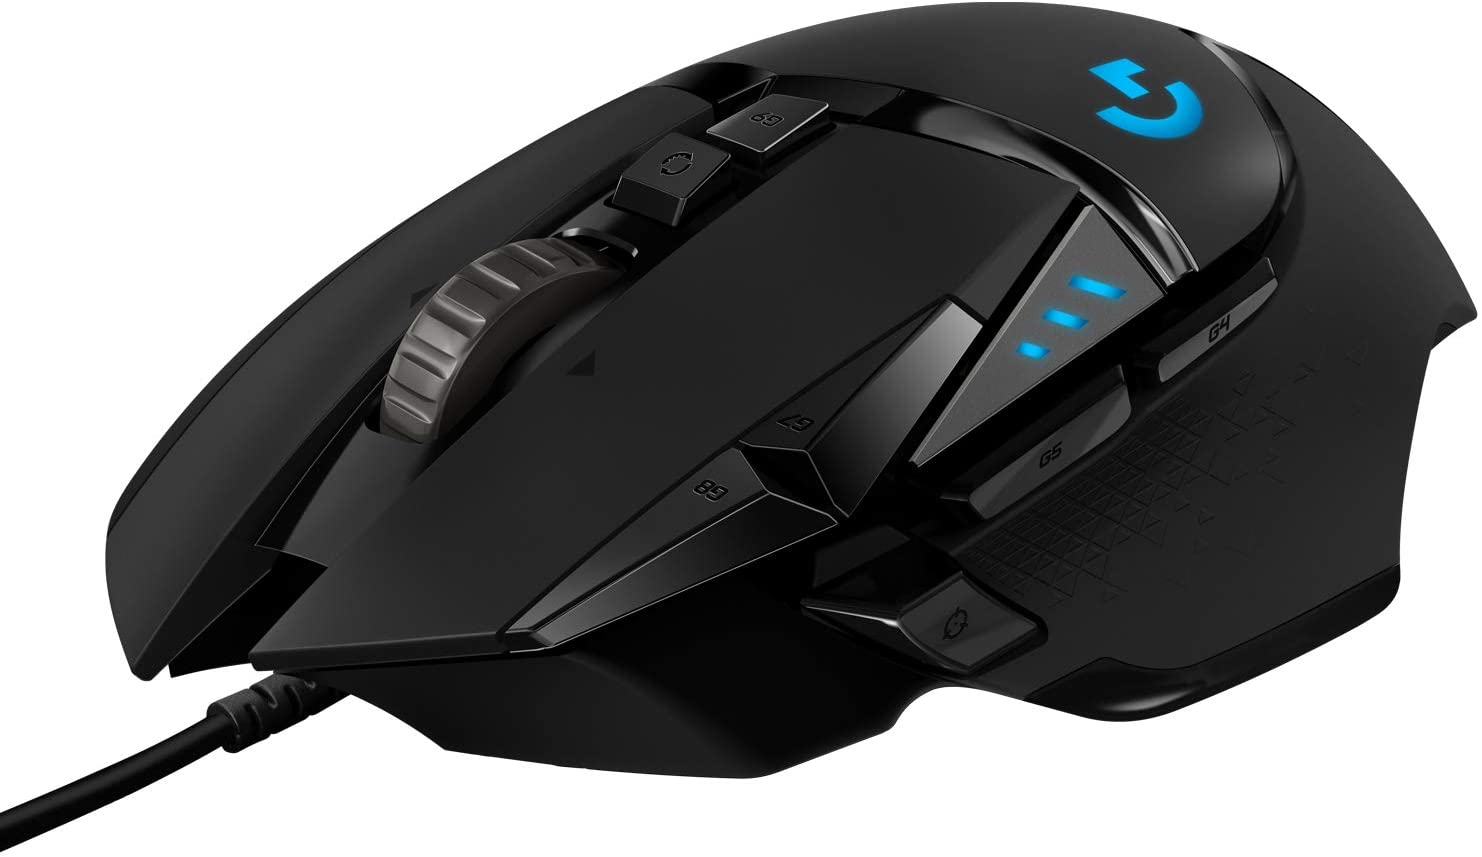 Logitech G502 HERO High Performance Wired Gaming Mouse, HERO 25K Sensor,Adjustable Weights, 11 Programmable Buttons, PC / Mac